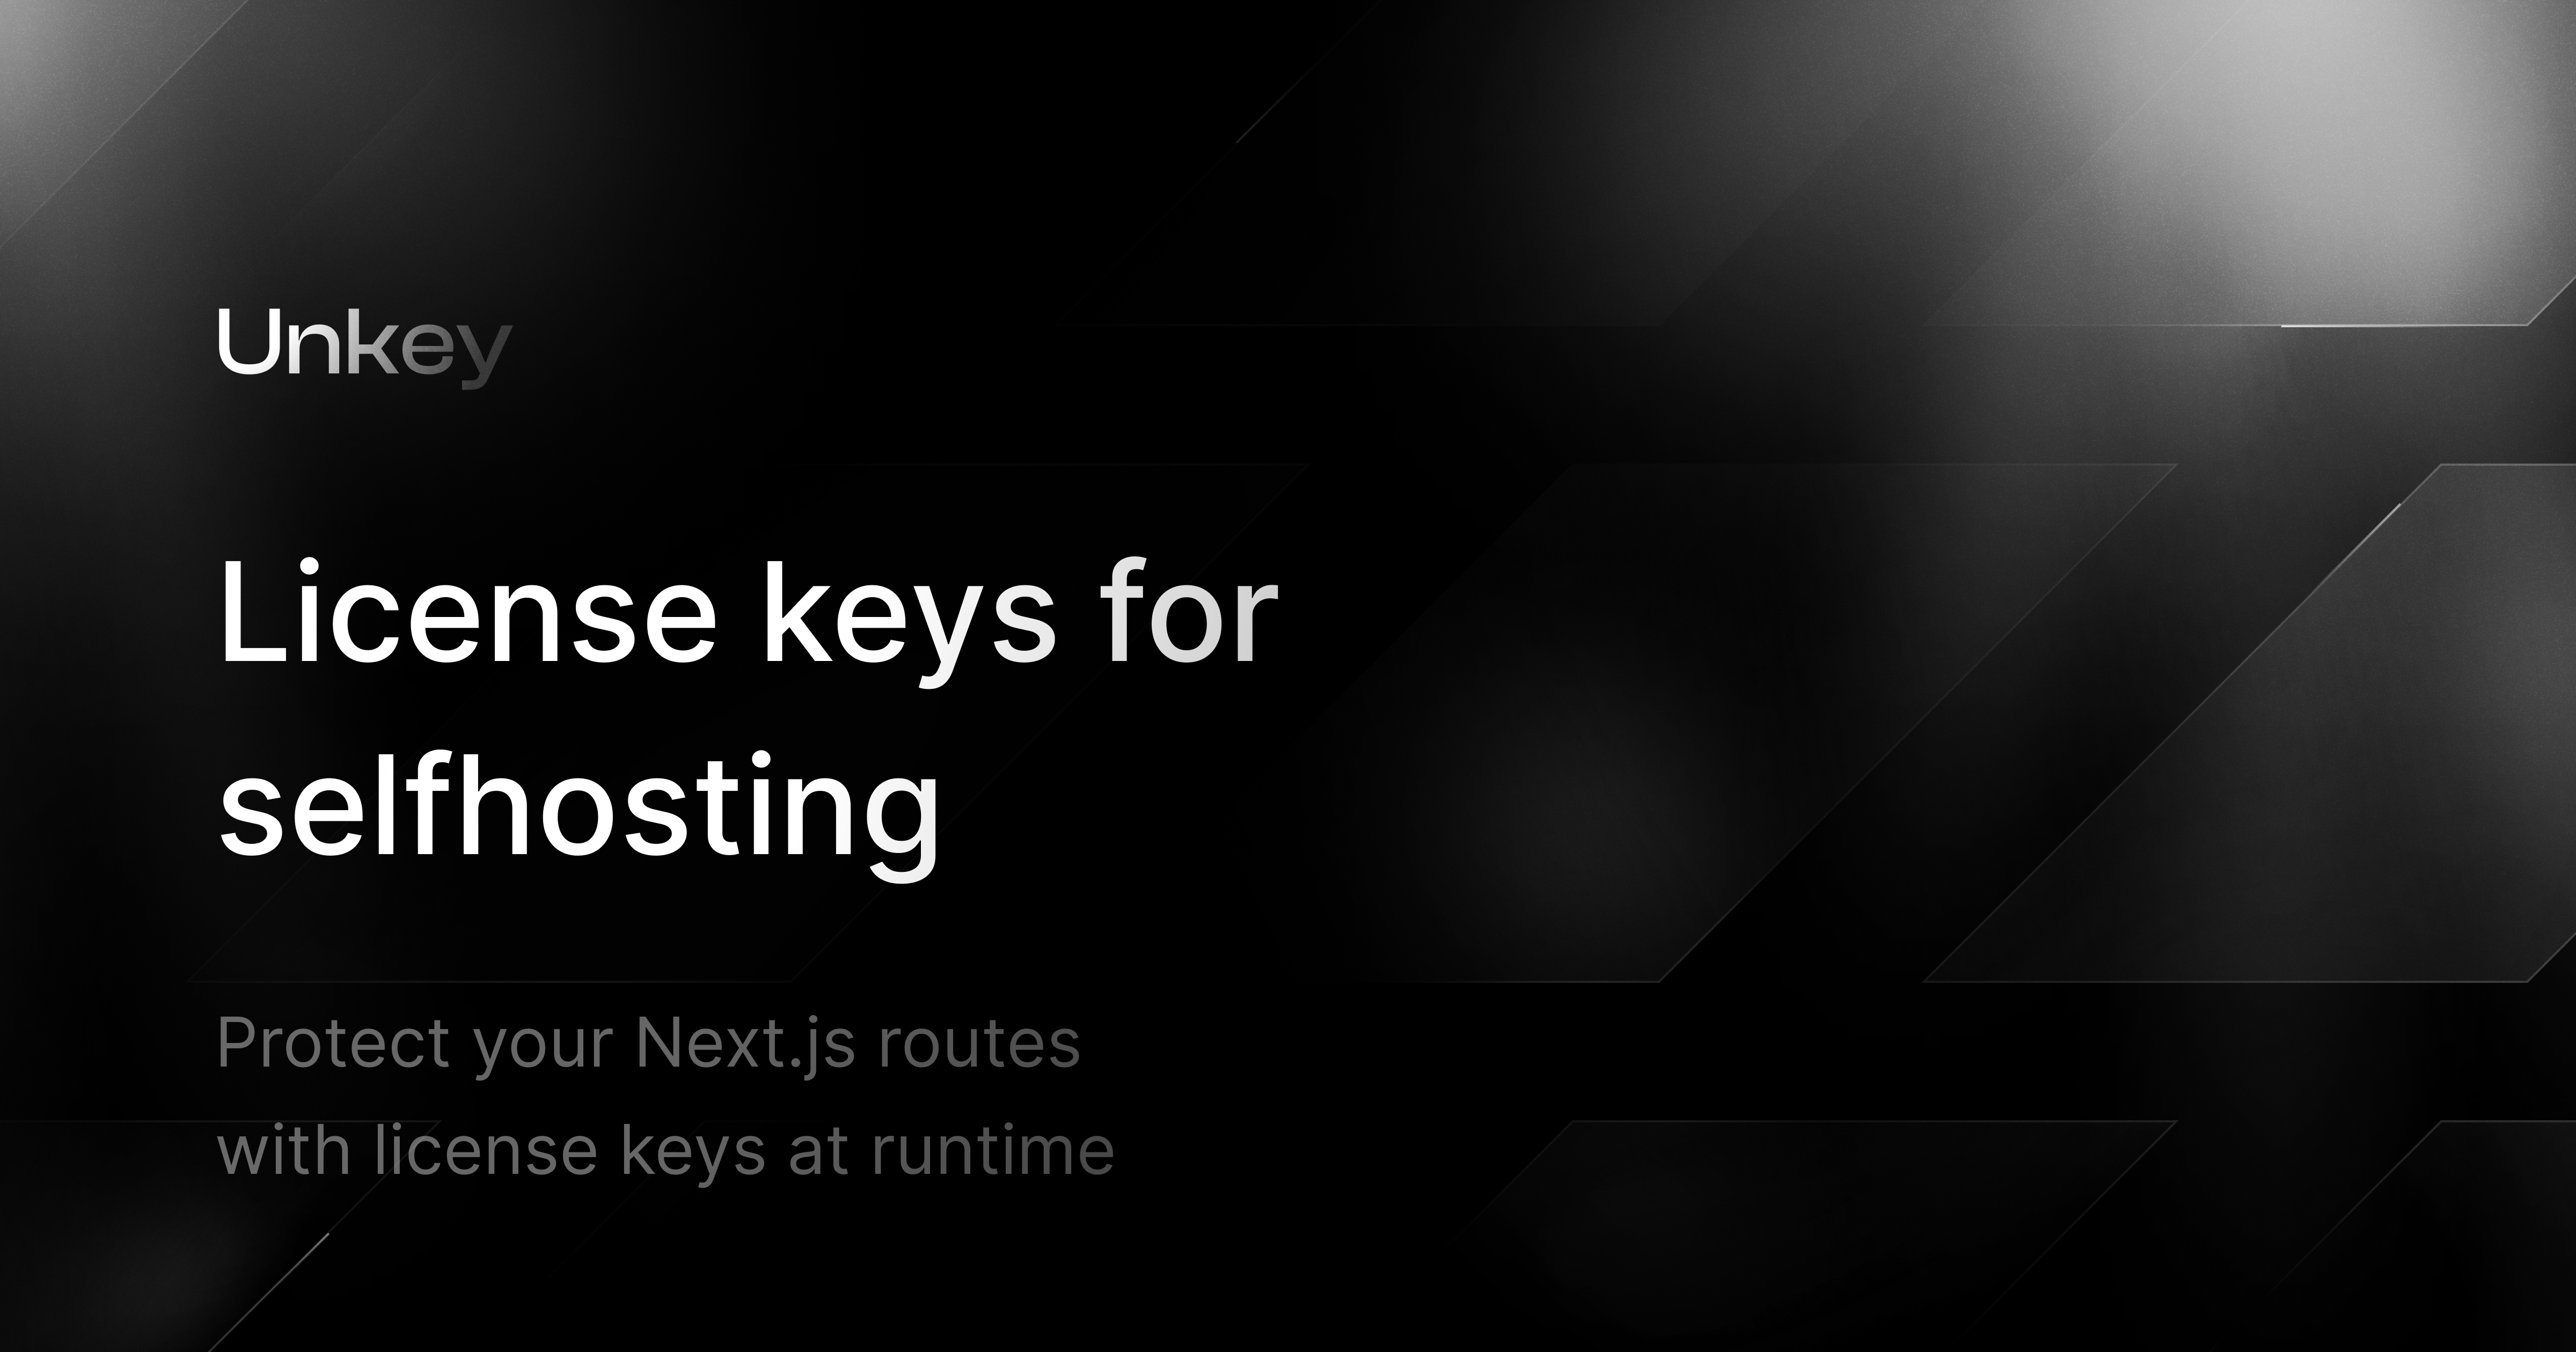 Protect your Next.js routes with license keys at runtime